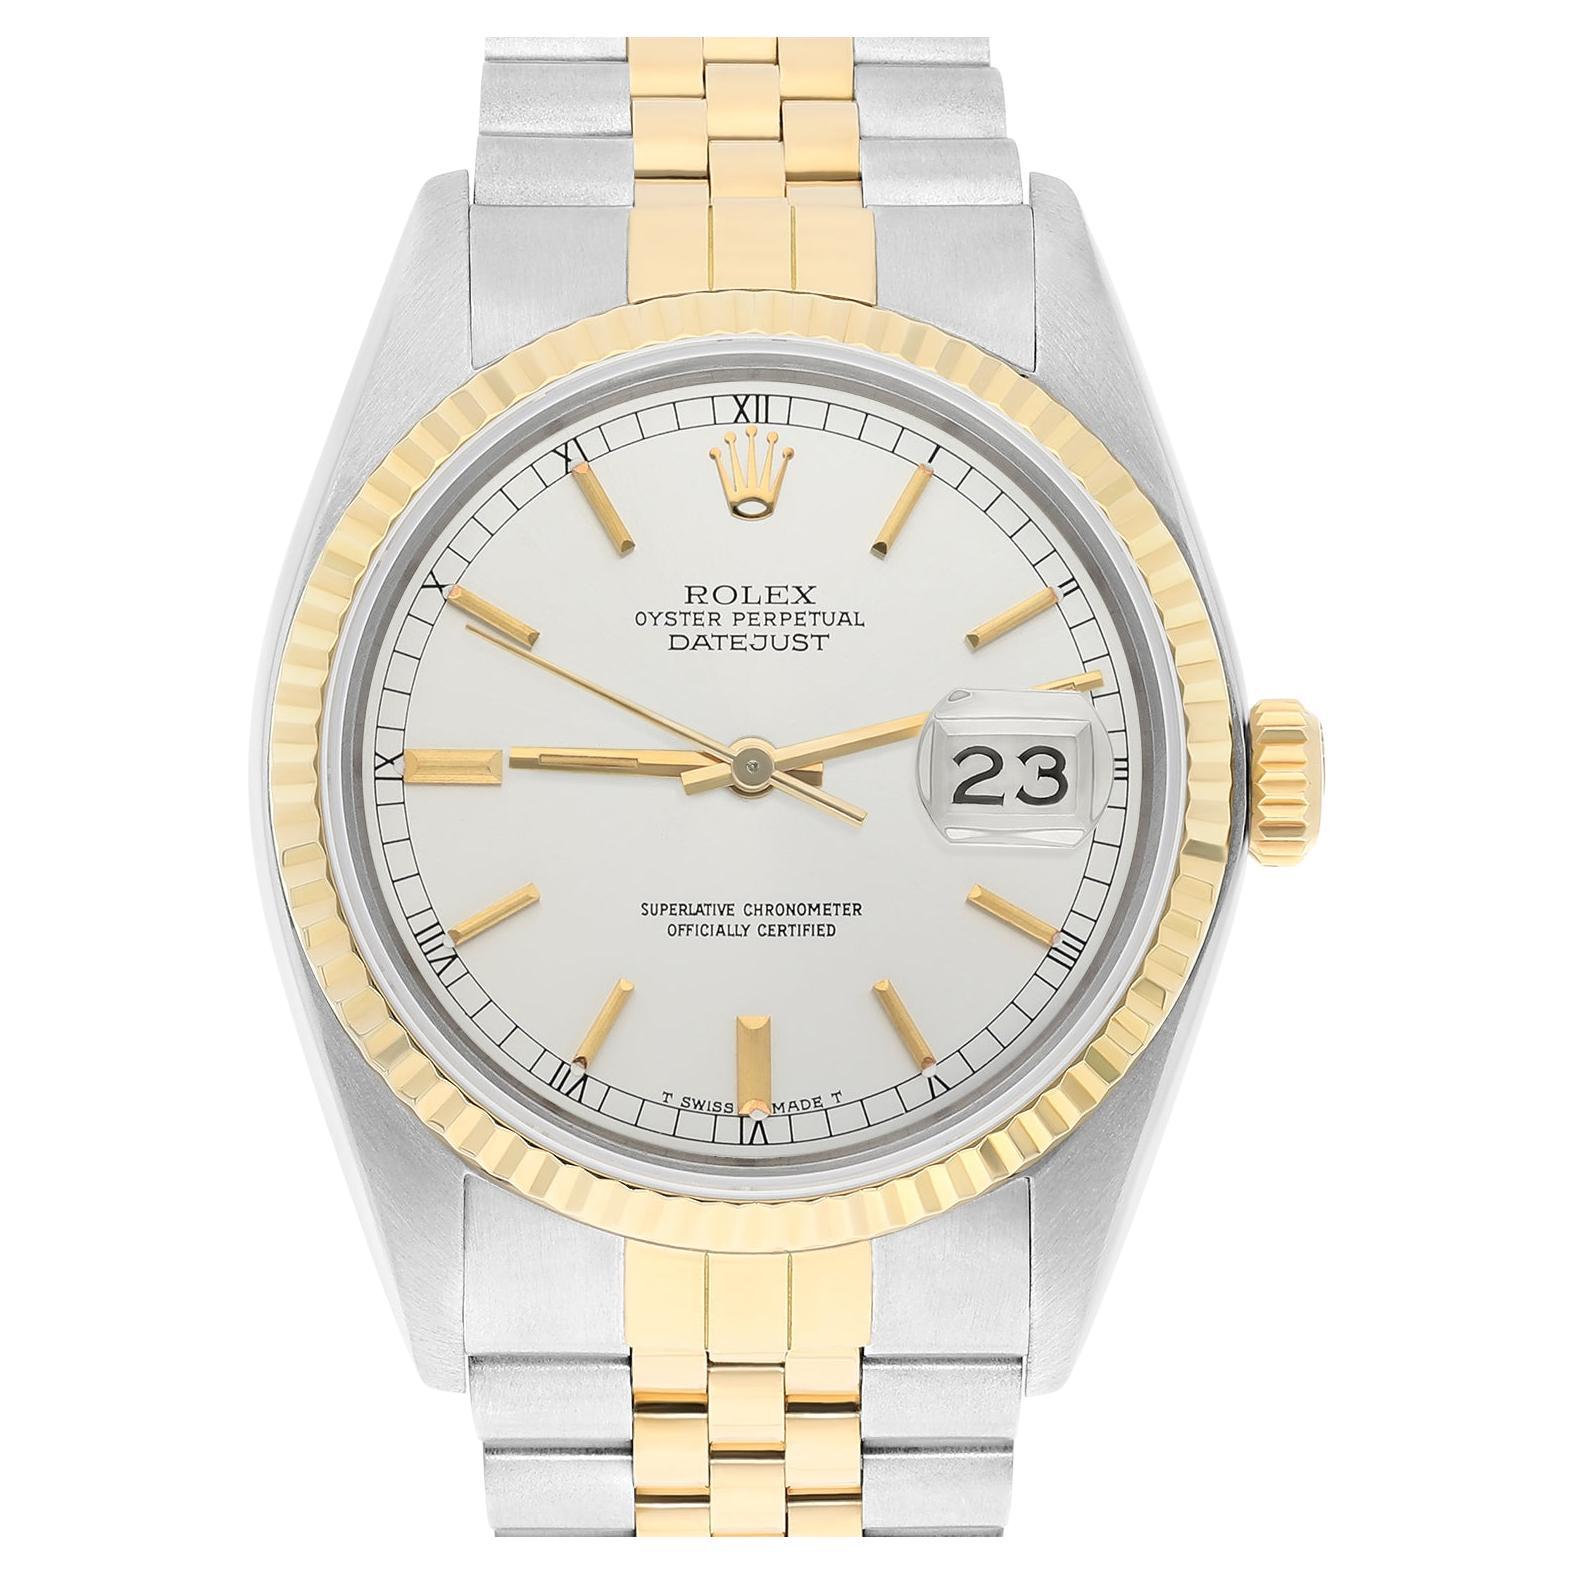 Rolex Datejust 36mm Two Tone Silver lndex Dial Jubilee 16013 Circa 1987 For Sale